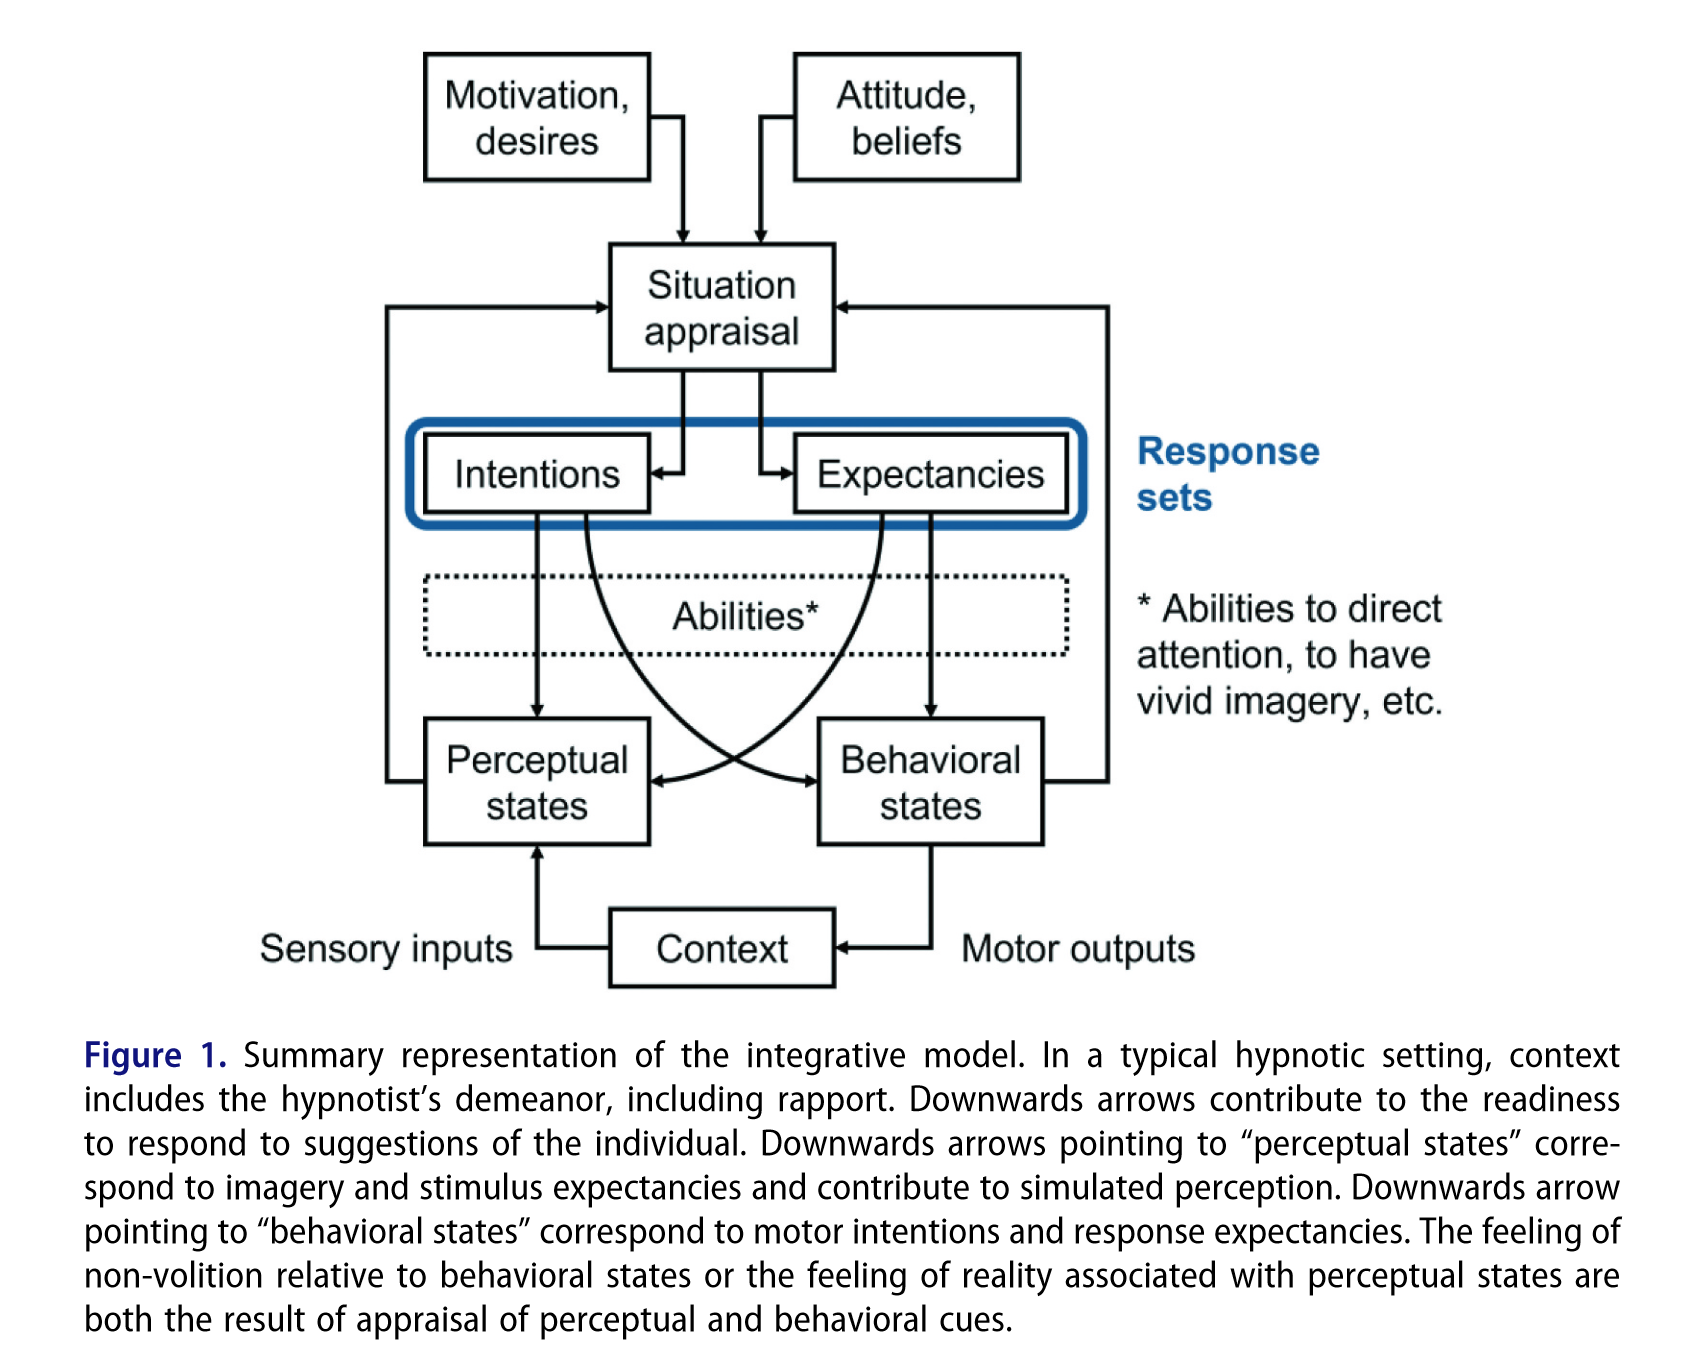 integrative model from _The response set theory of hypnosis reconsidered_